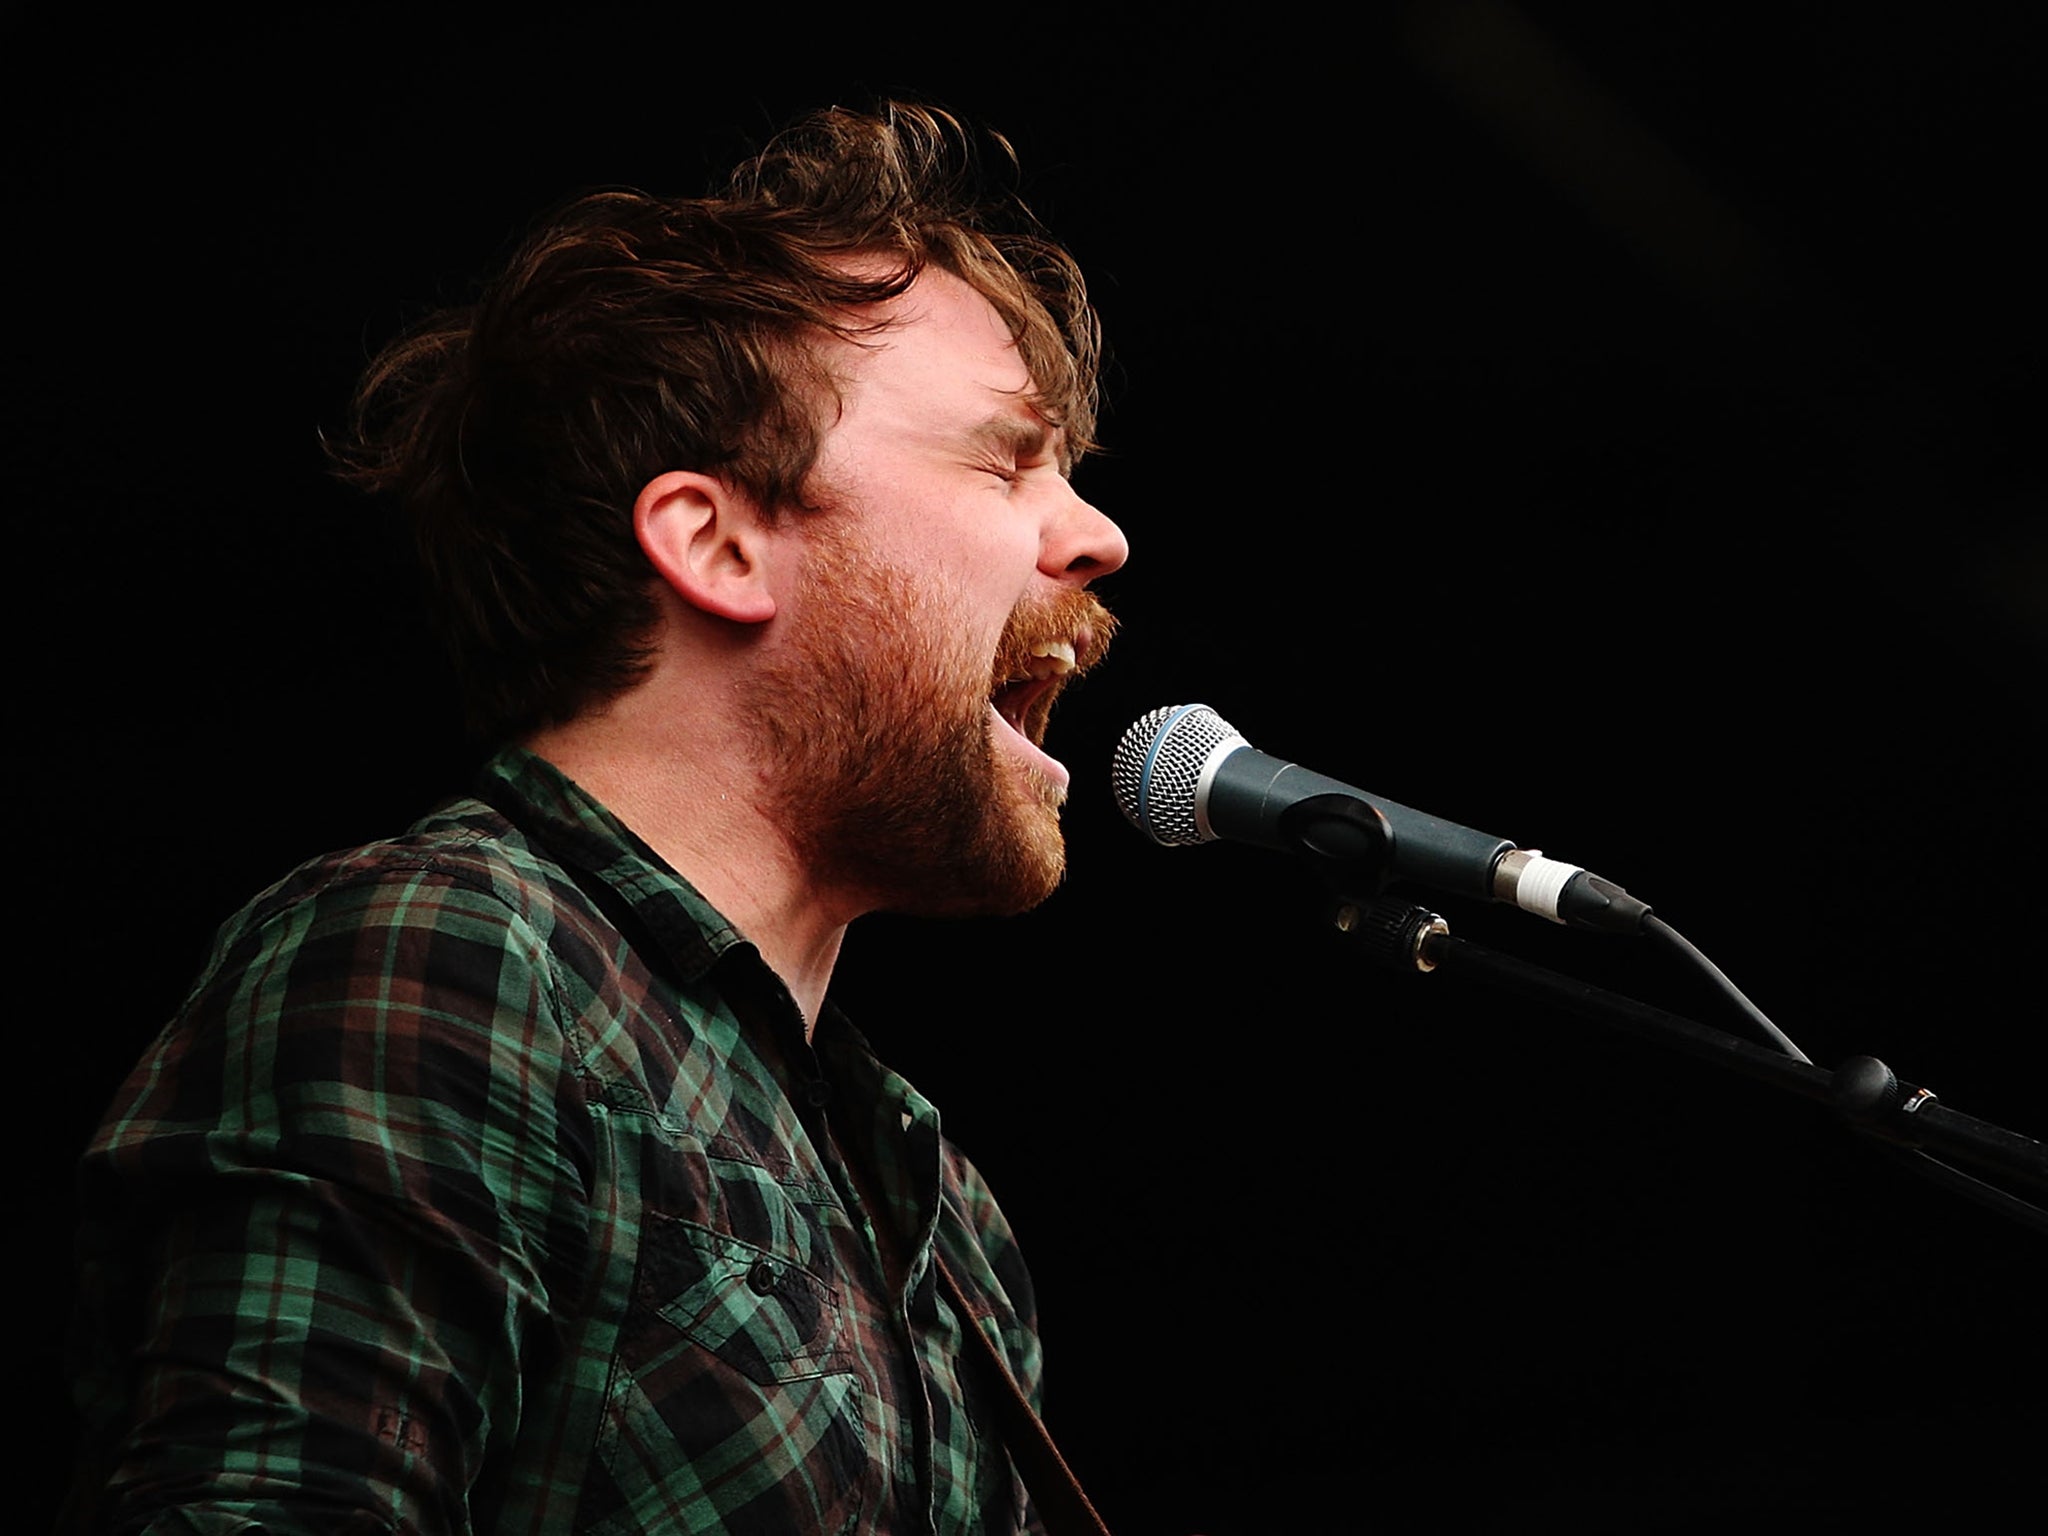 Scott Hutchison of Frightened Rabbit struggled with mental health issues, and took his own life in 2018